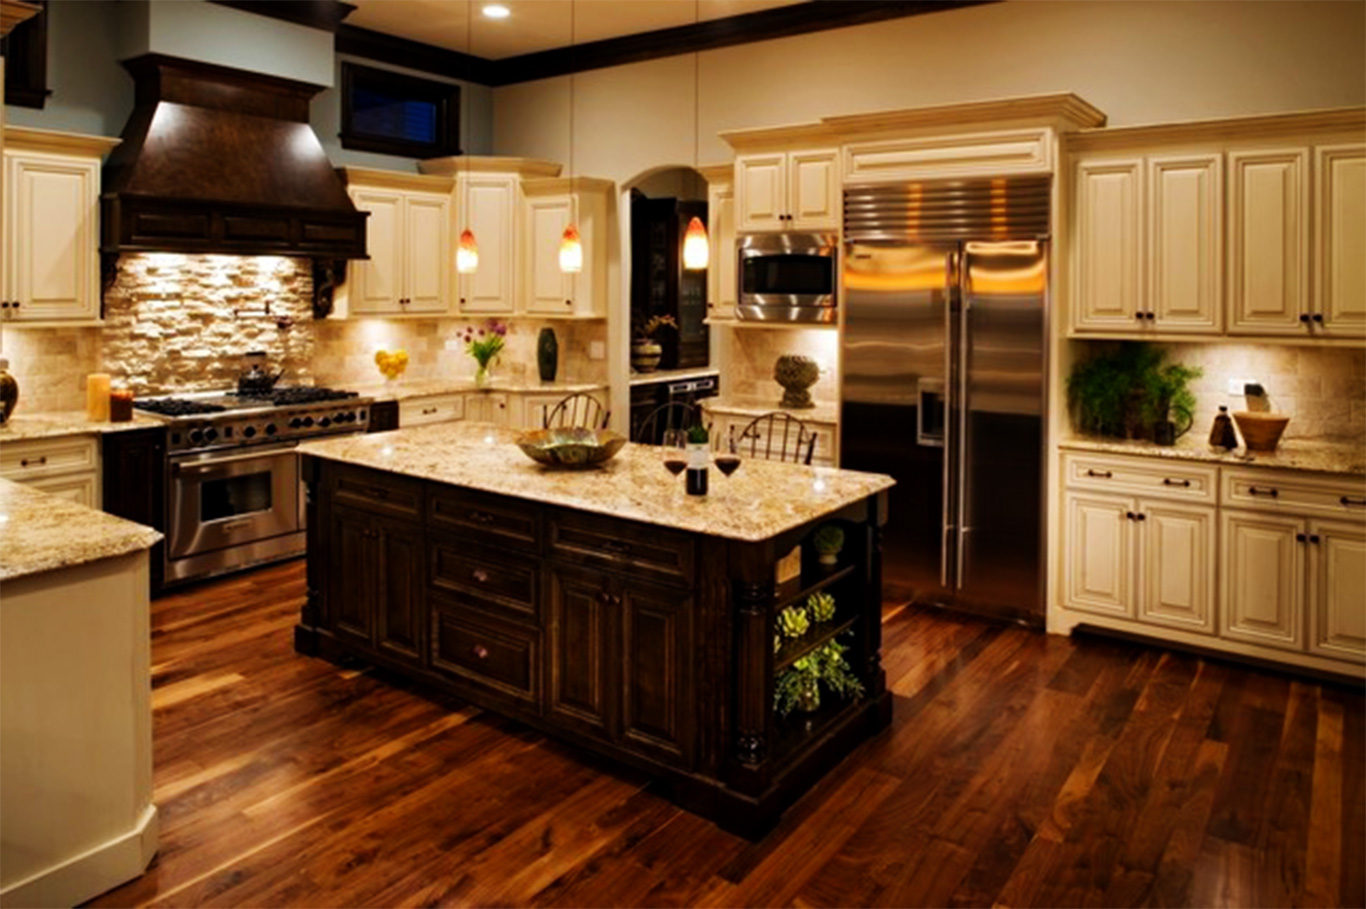 kitchen kitchens traditional ceilings high beautiful designs cabinets interior cream wood english awesome board type cabinet colored dark luxurious transitional